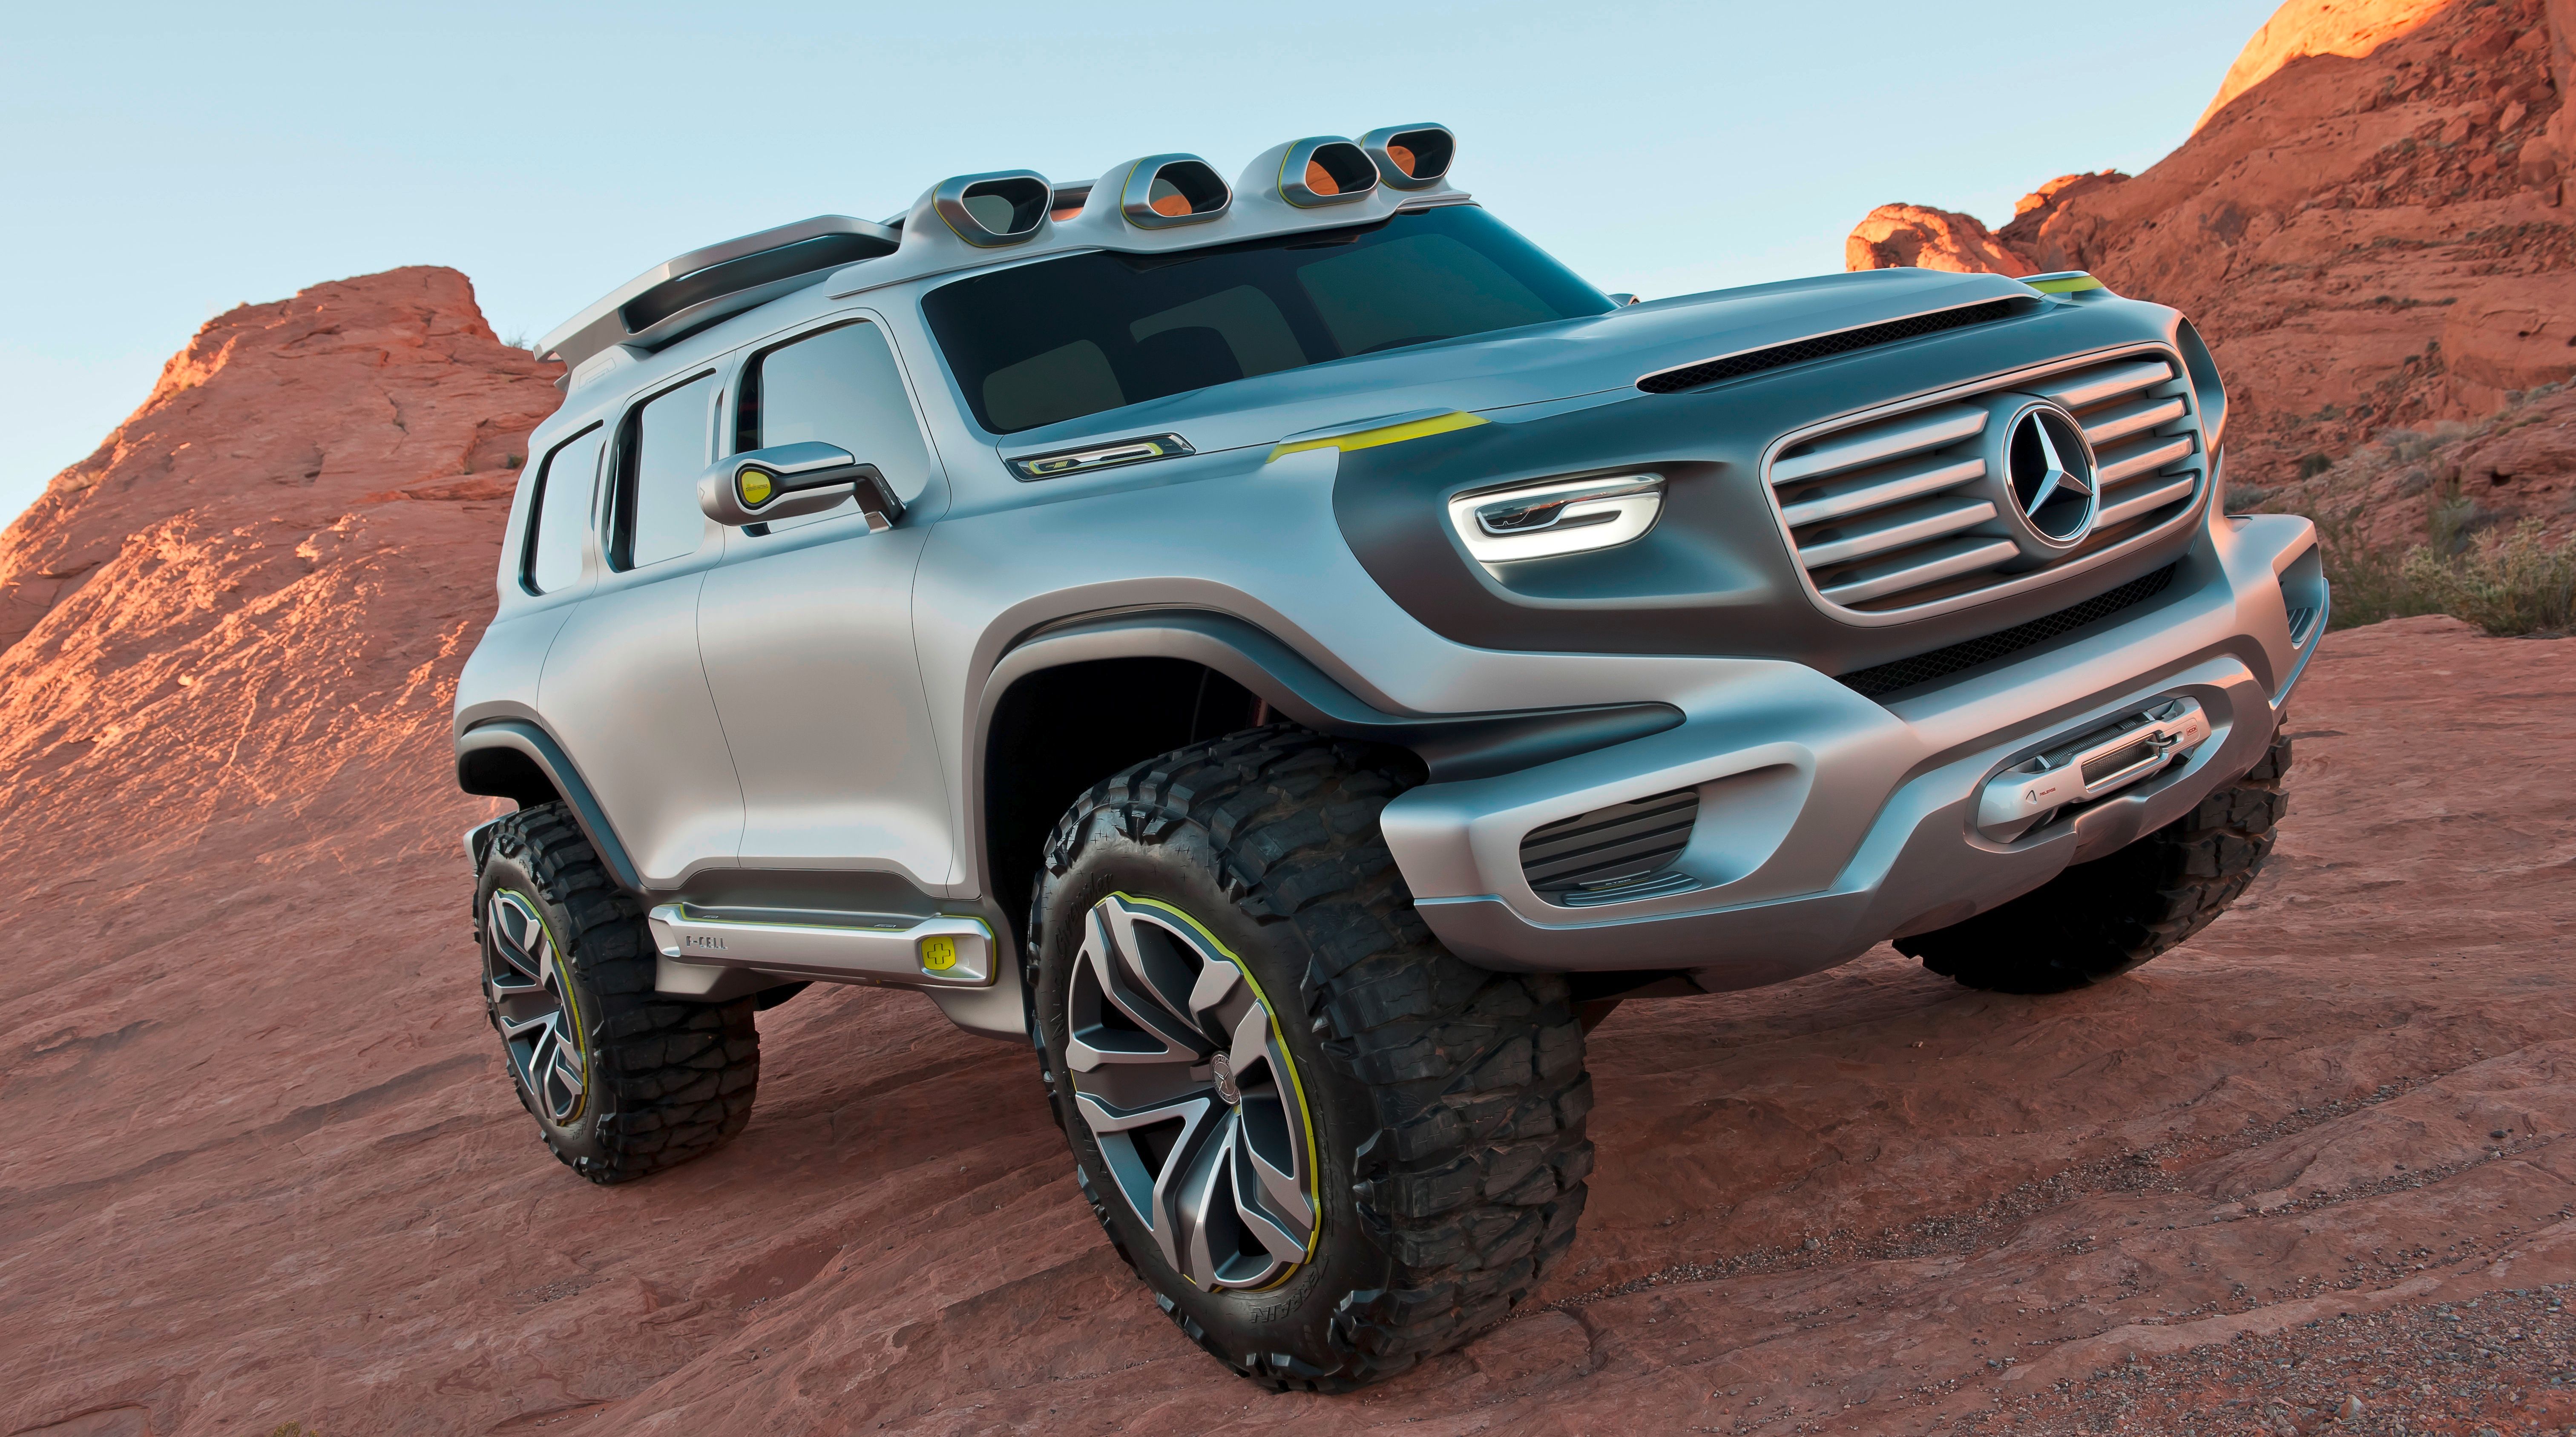  Mercedes is working on a baby G-Class; a smaller utility vehicle 